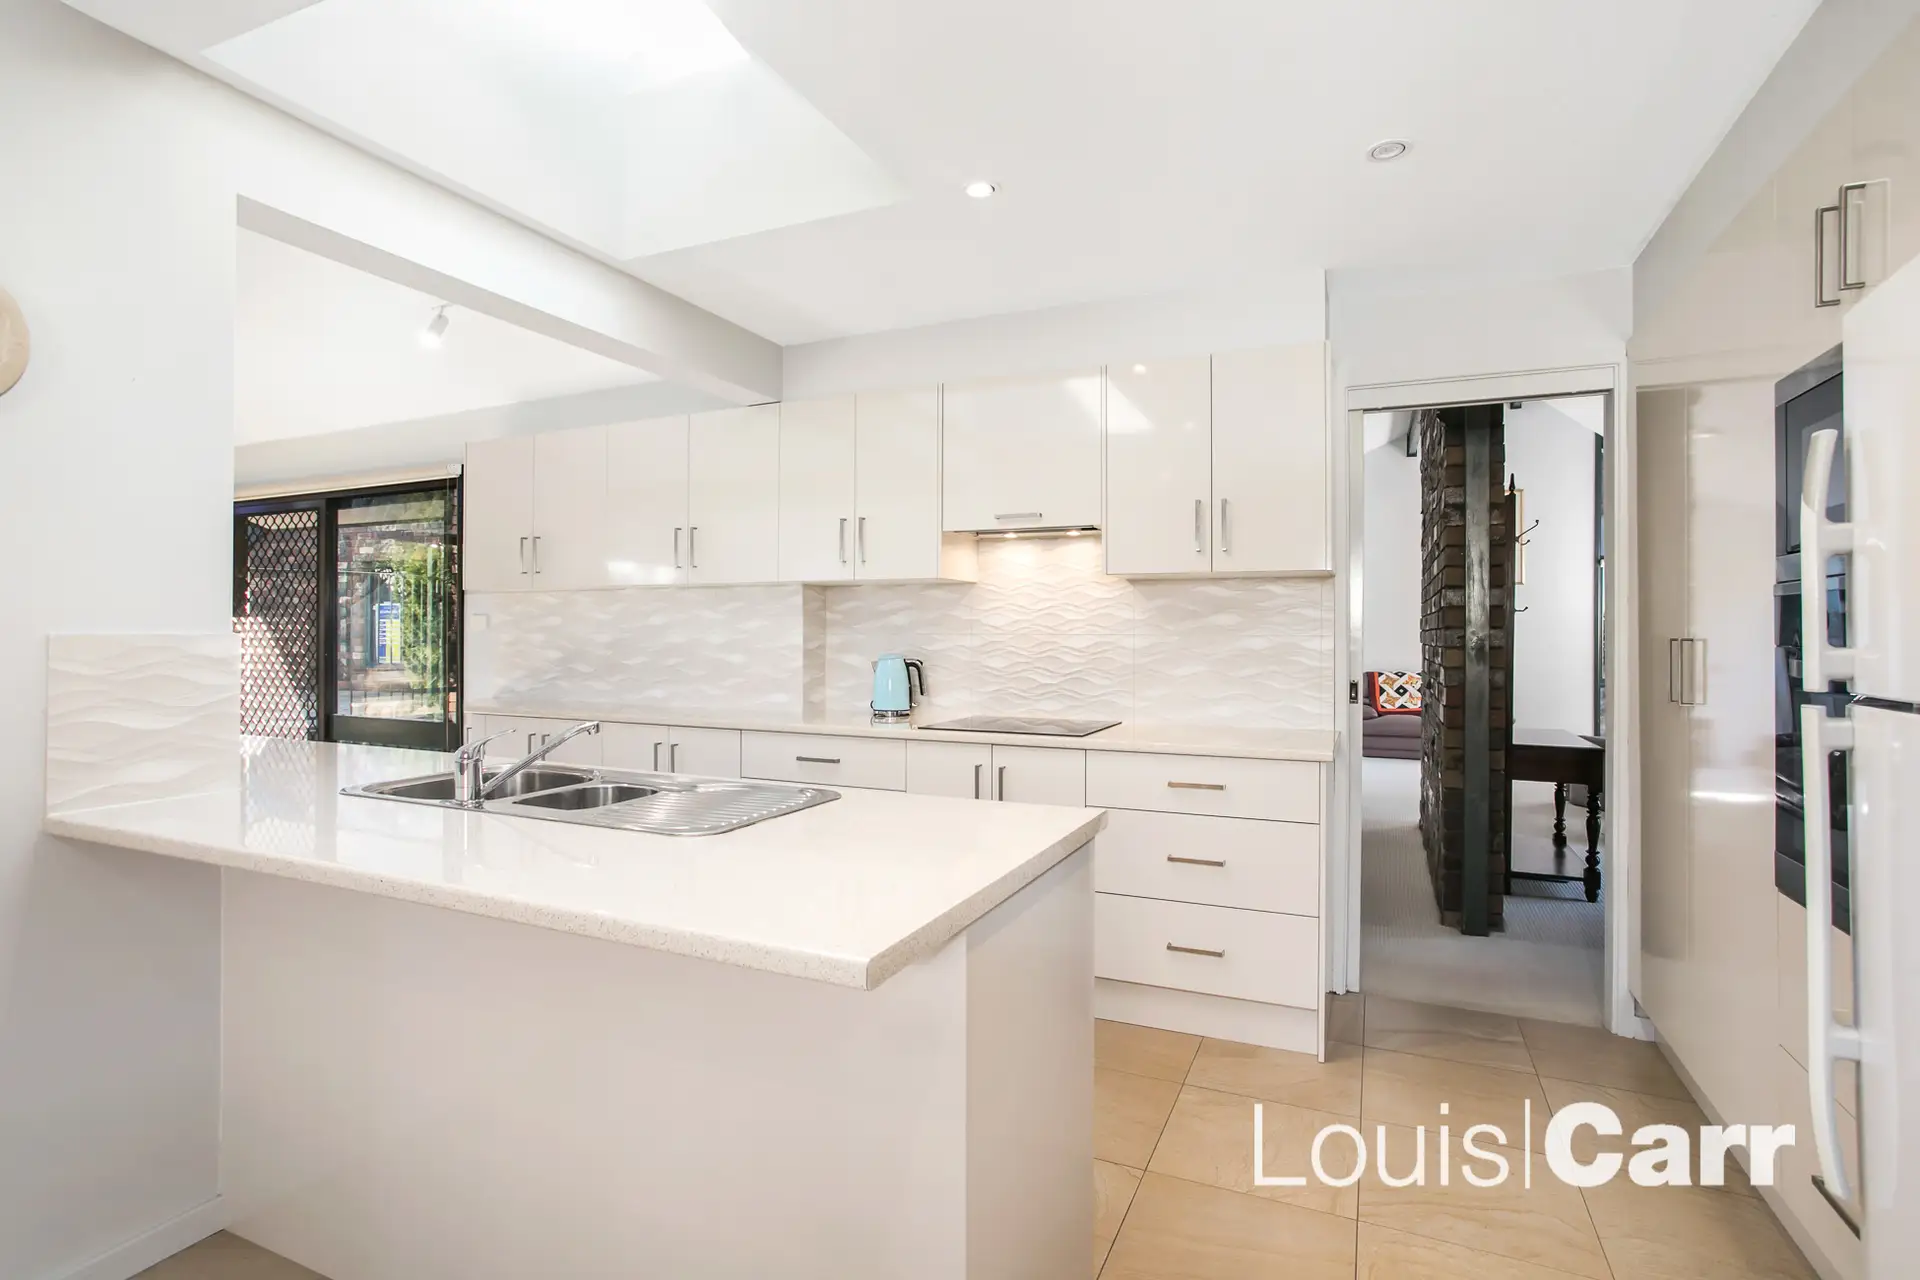 Photo #3: 41 Francis Greenway Drive, Cherrybrook - Sold by Louis Carr Real Estate